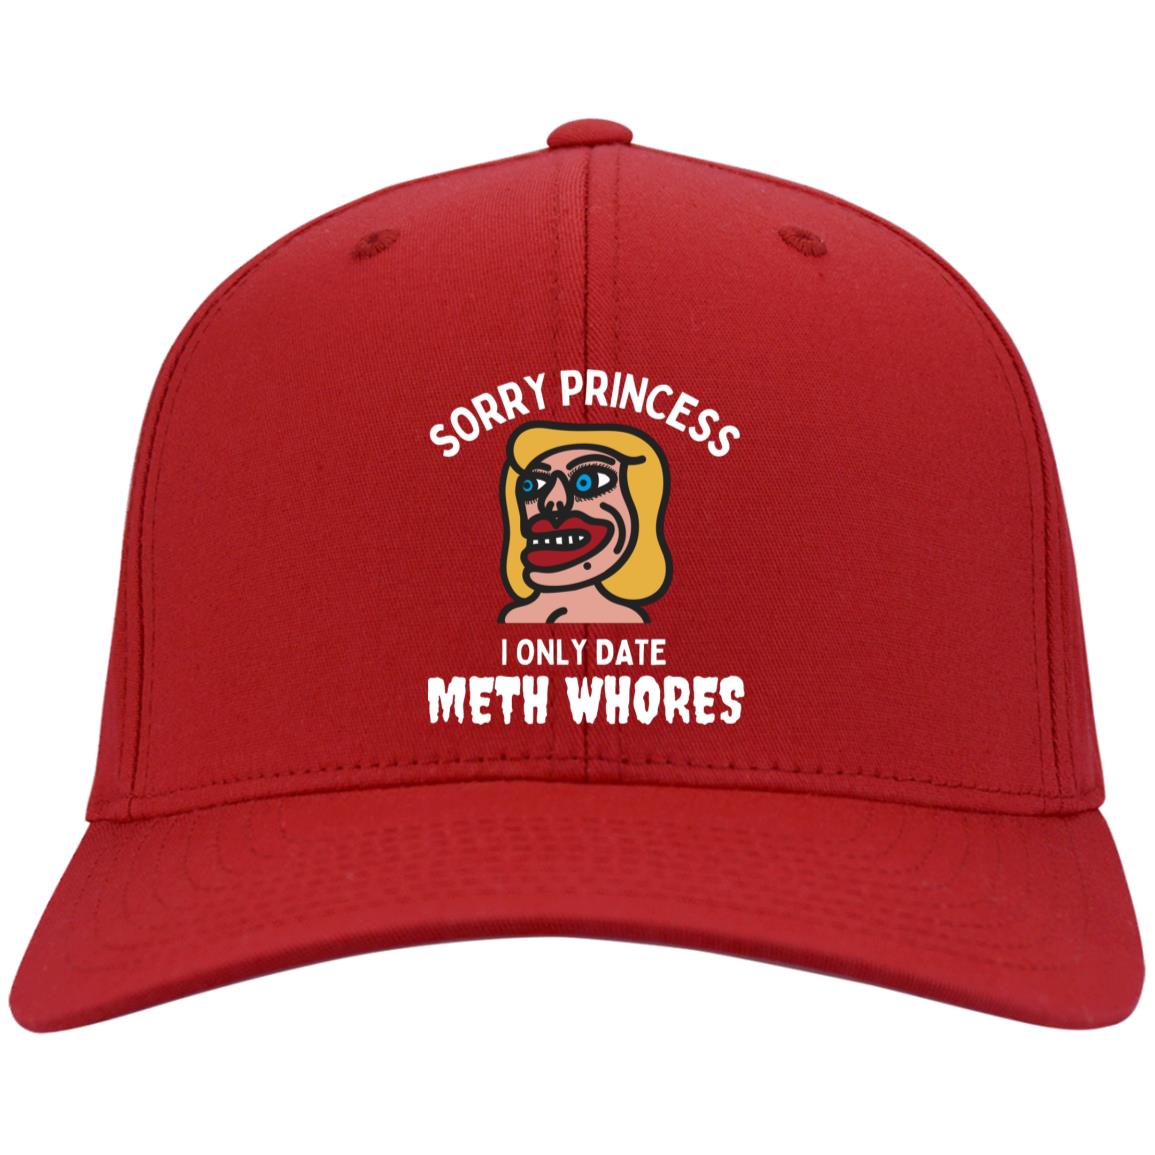 Sorry Princess I Only Date Meth Whores Adult Humor  Twill Cap